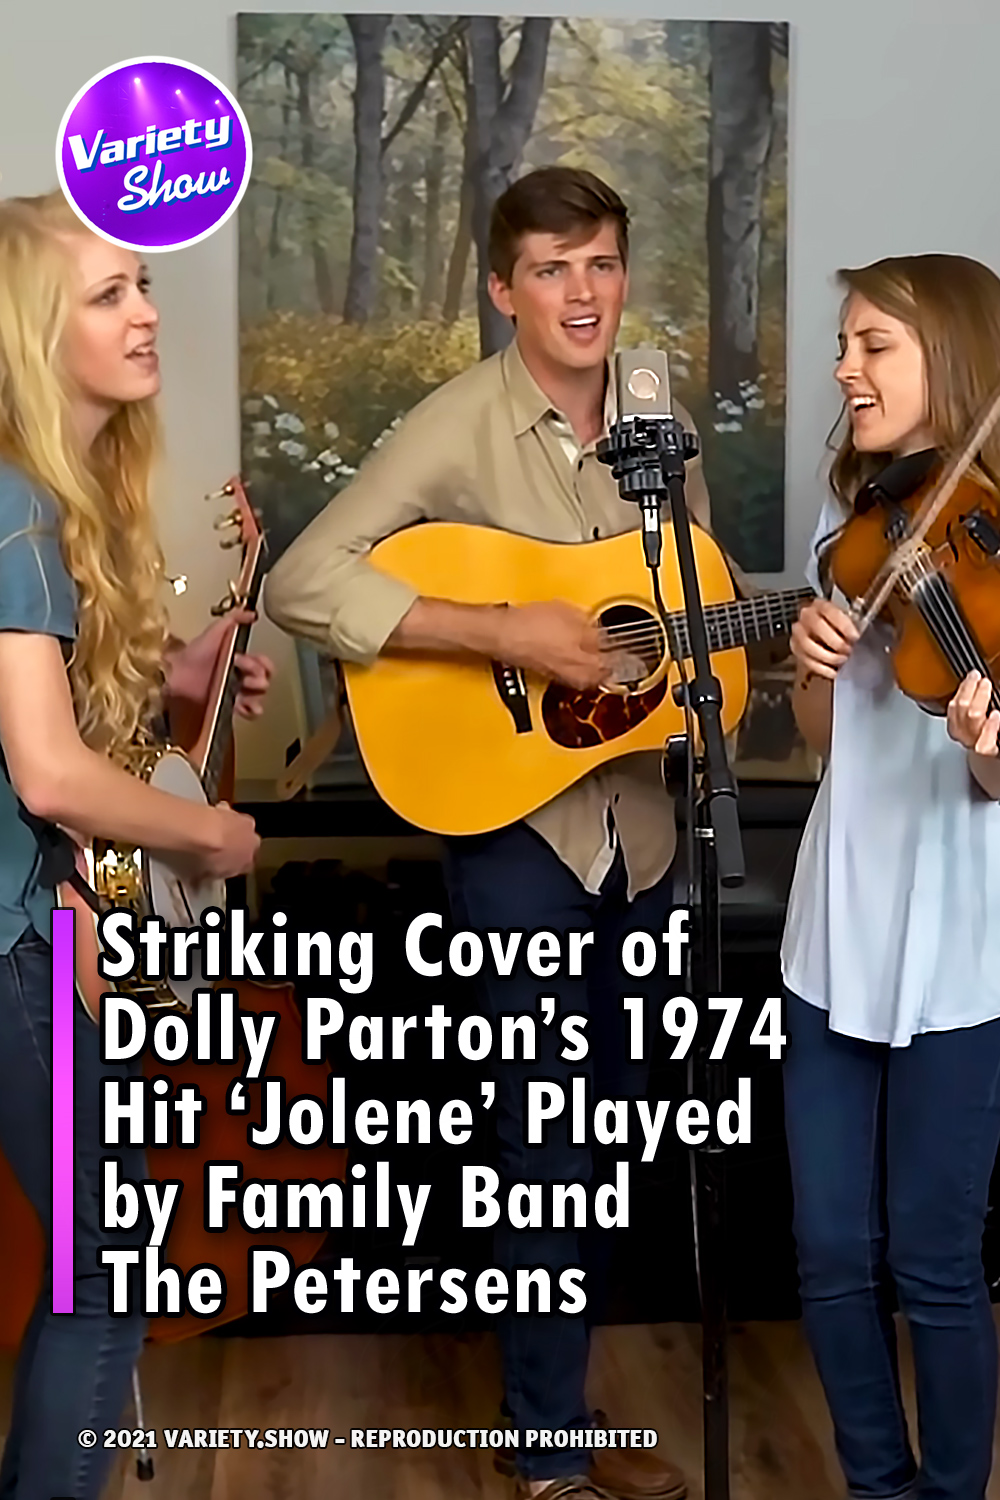 Striking Cover of Dolly Parton’s 1974 Hit ‘Jolene’ Played by Family Band The Petersens